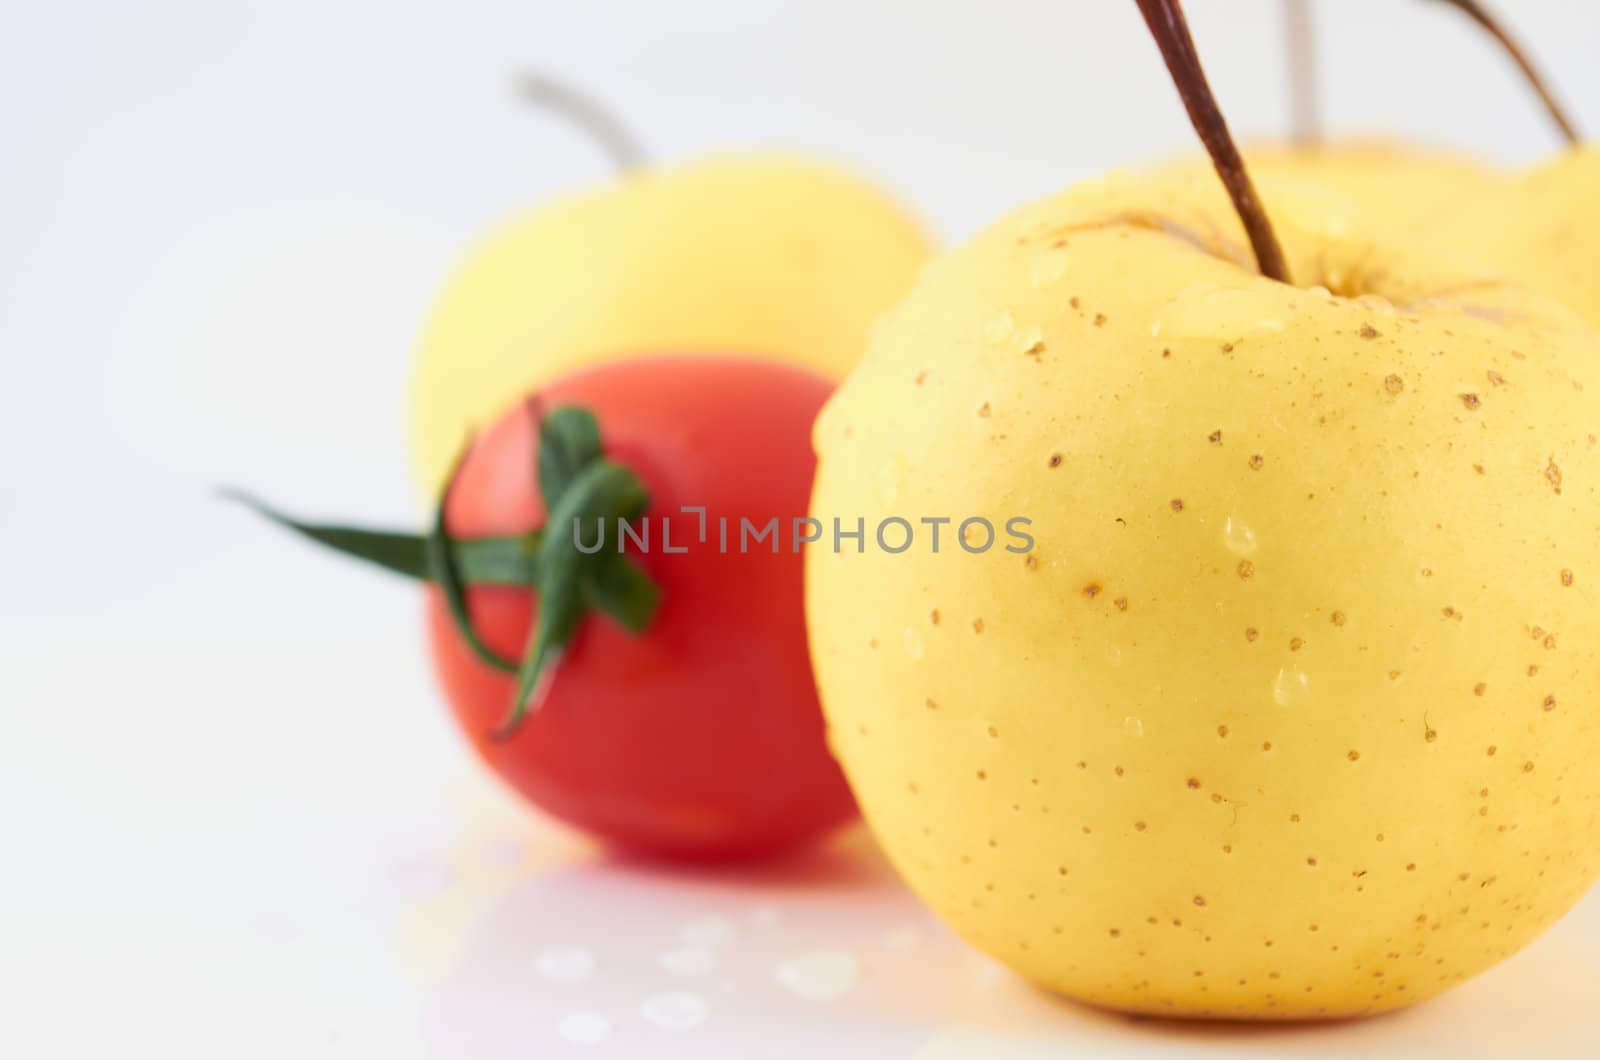 Juicy apples and tomato in drops of water on a white background